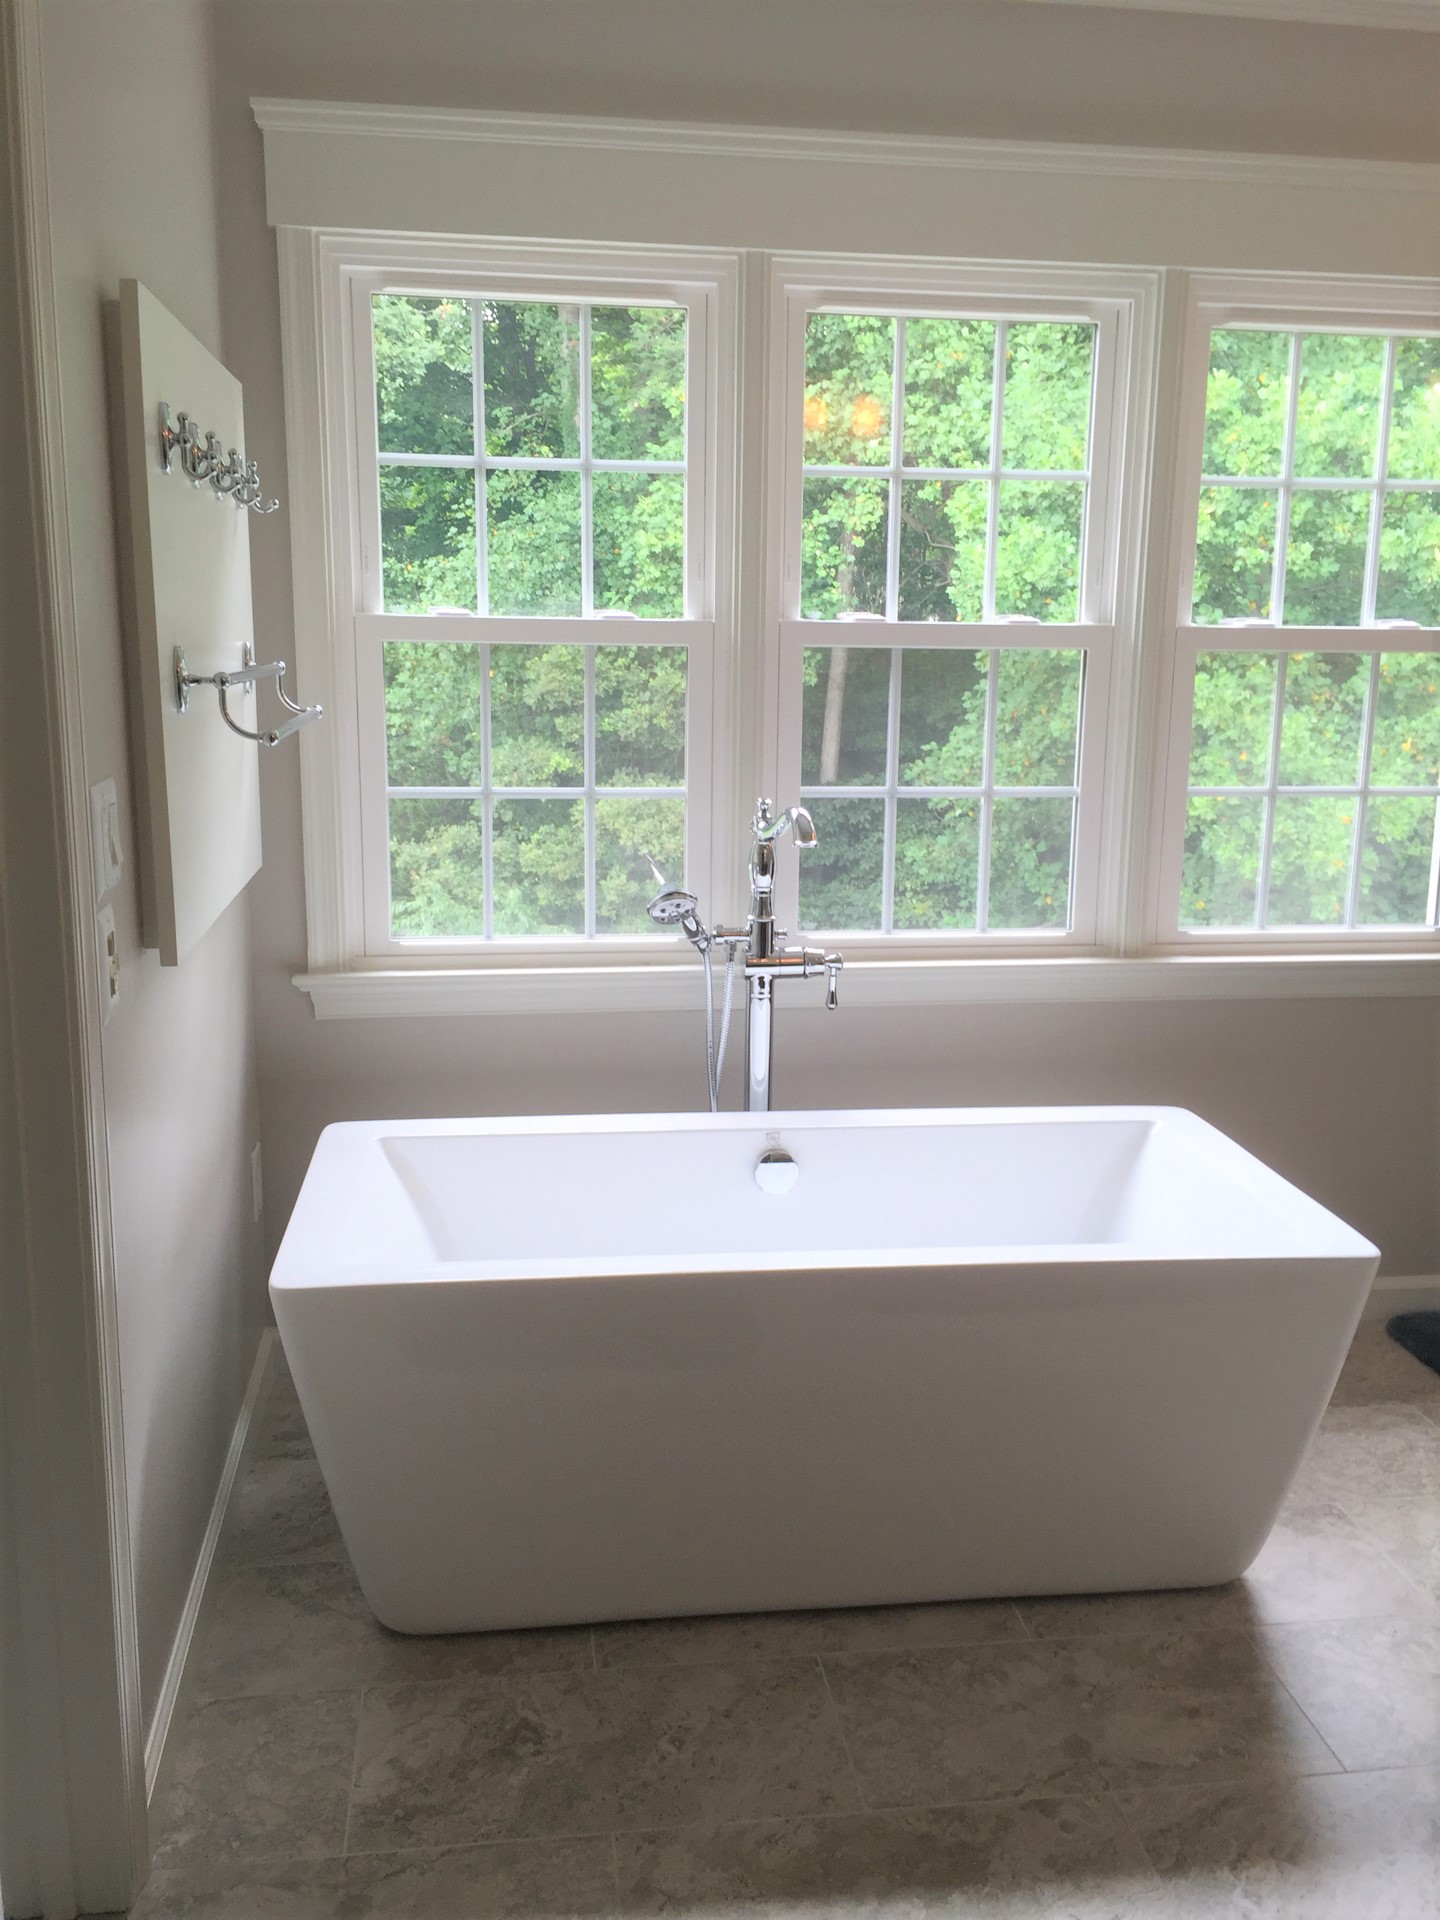 Master Bathroom Remodeling and Design, Freestanding Tub, new window and wood trim accents, Annandale, VA